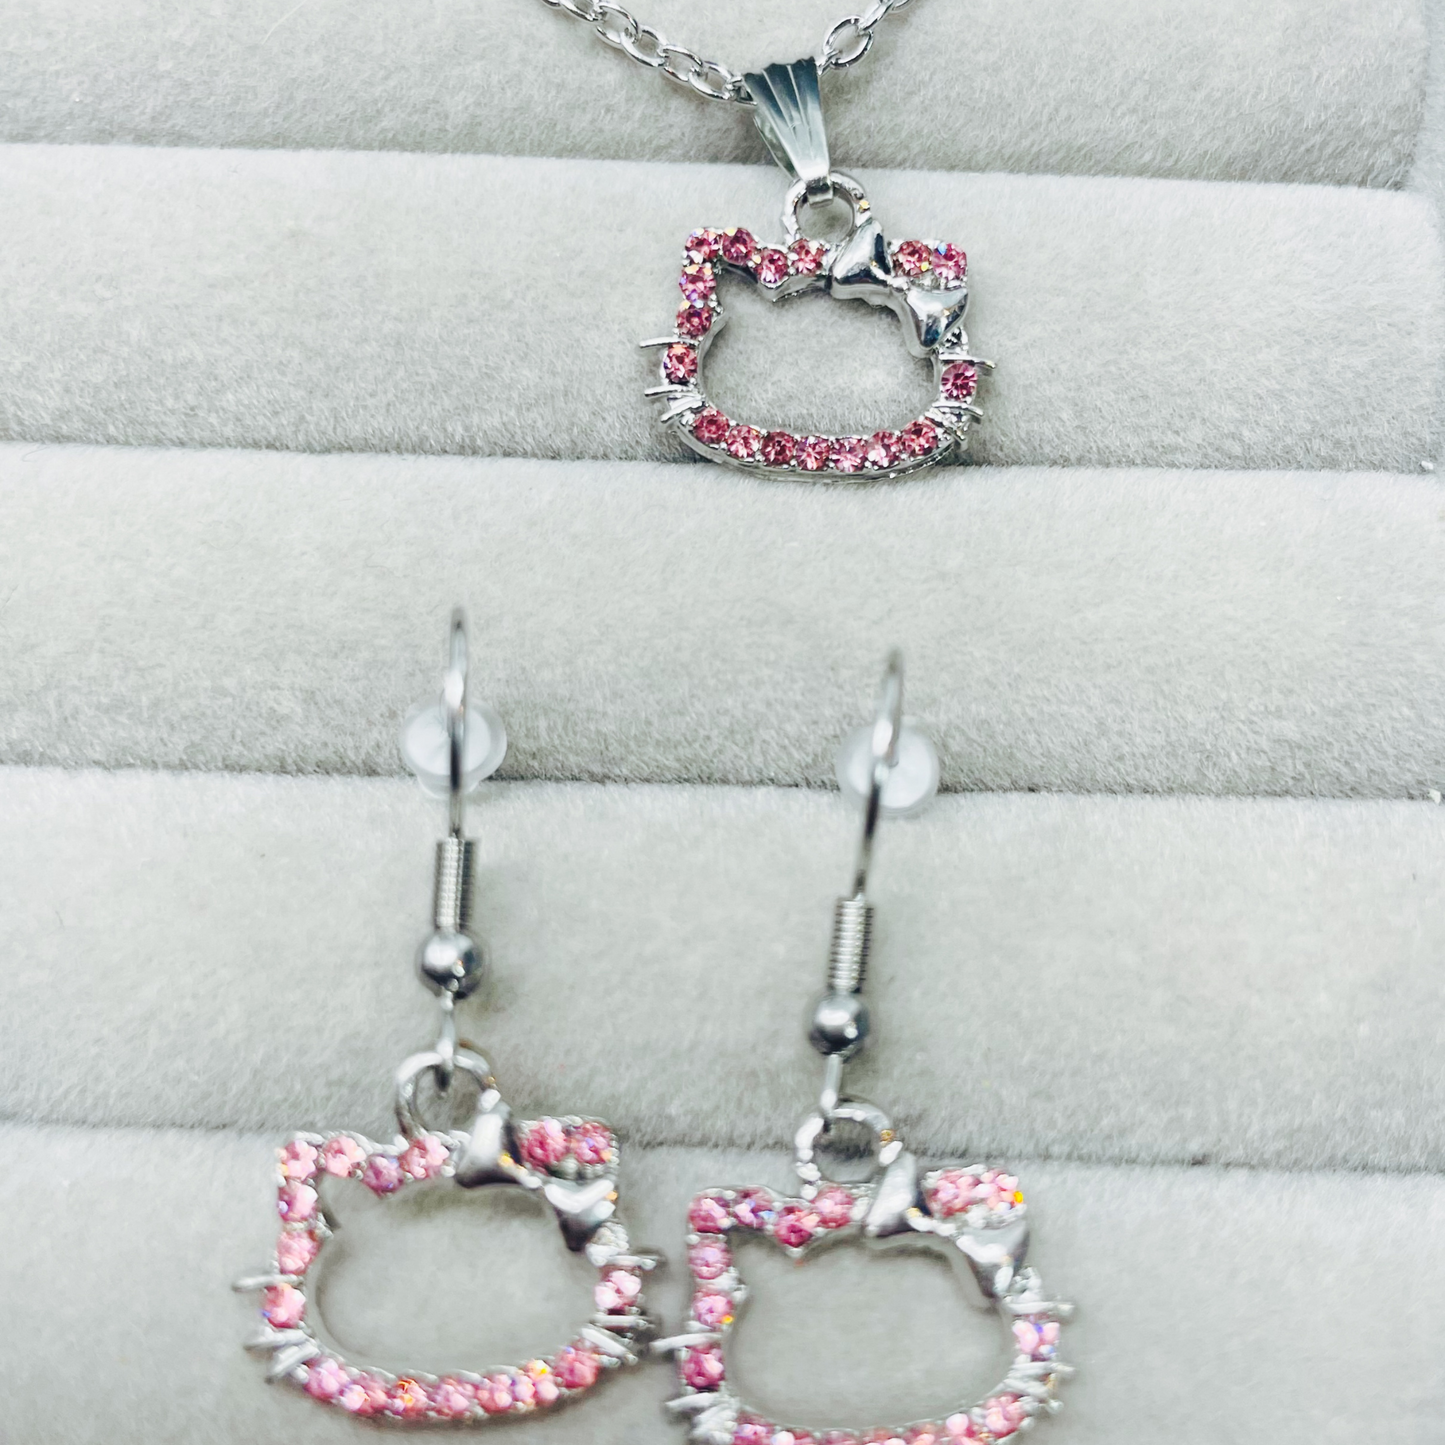 Cute cat Kitty Necklace Set, Kwaii Kitty, Stainless Steel, Gift For Her